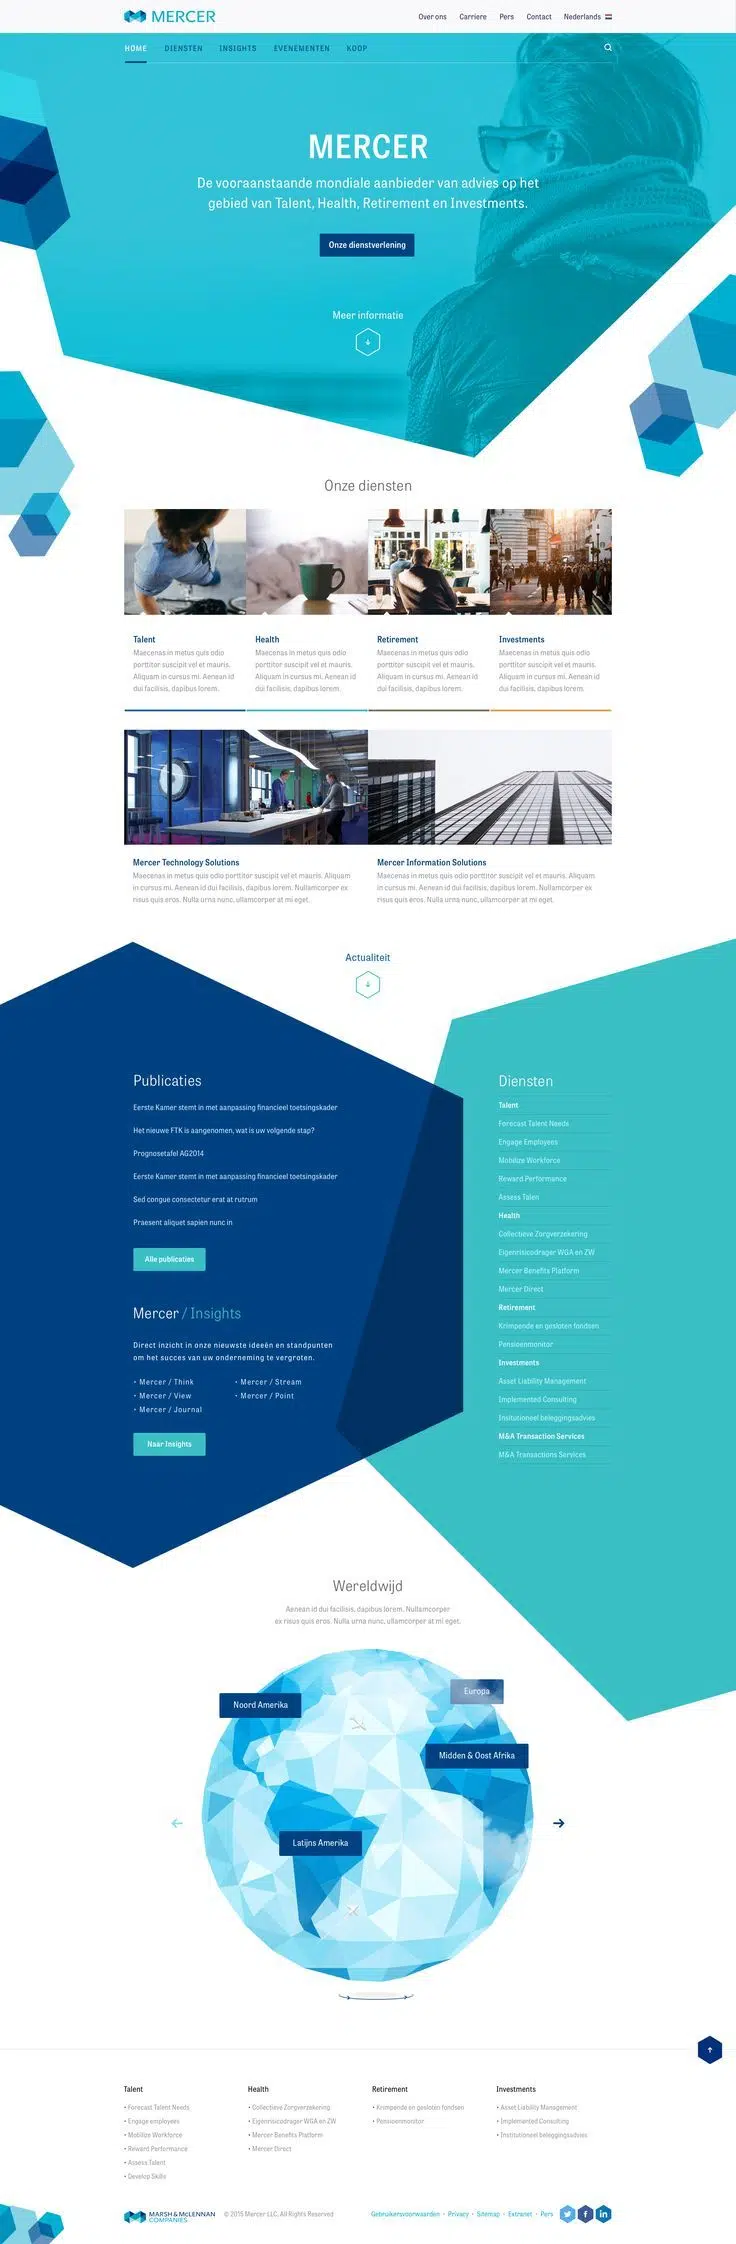 Mercer // Hi Friends, look what I just found on #web #design! Make sure to follo...